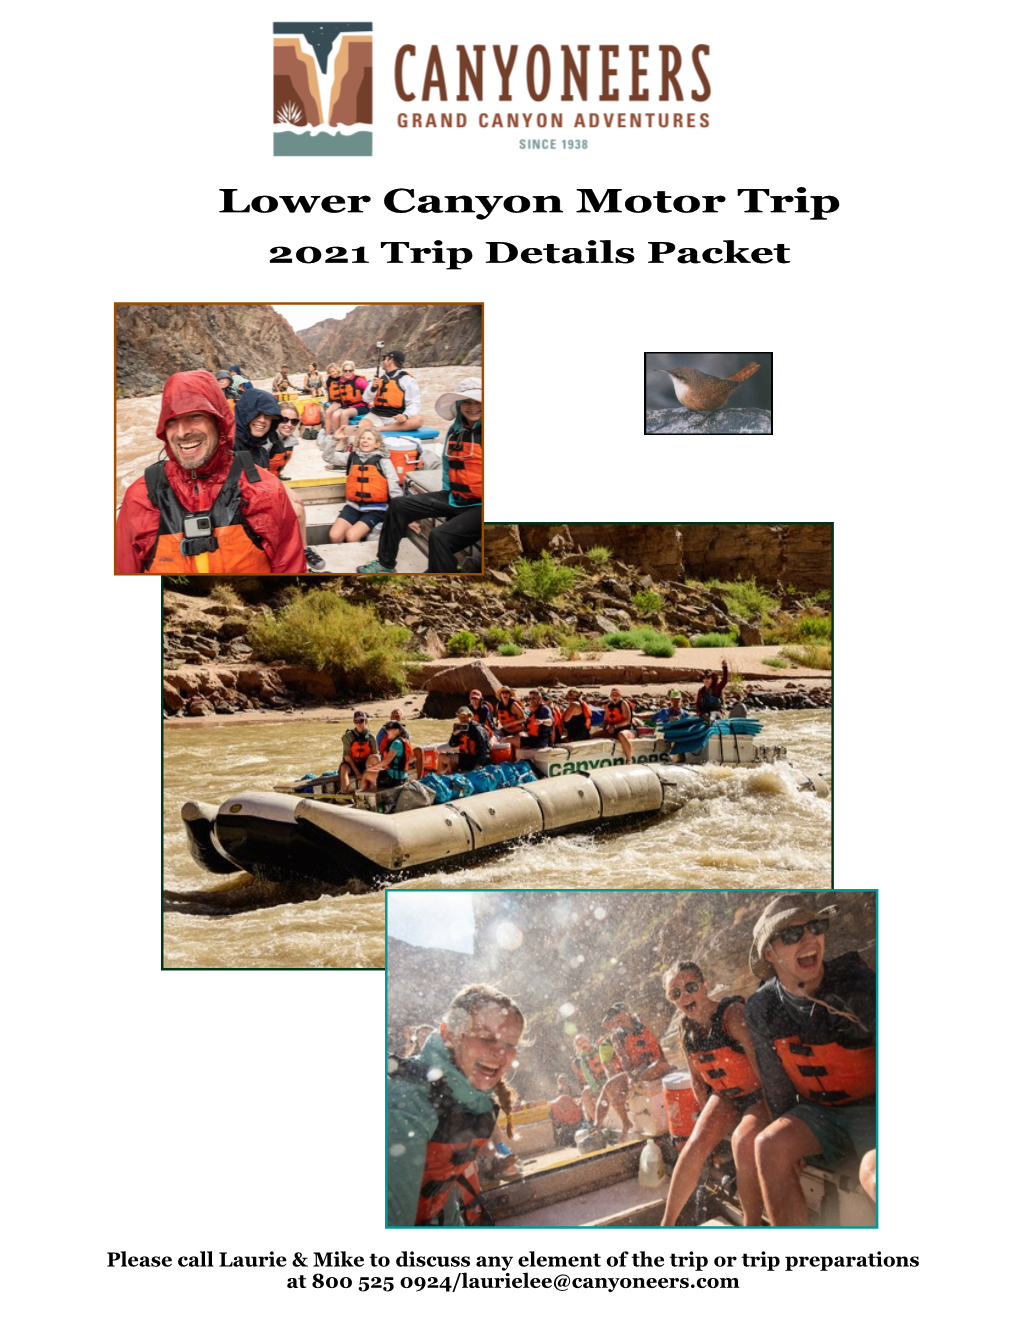 Lower Canyon Motor Trip 2021 Trip Details Packet